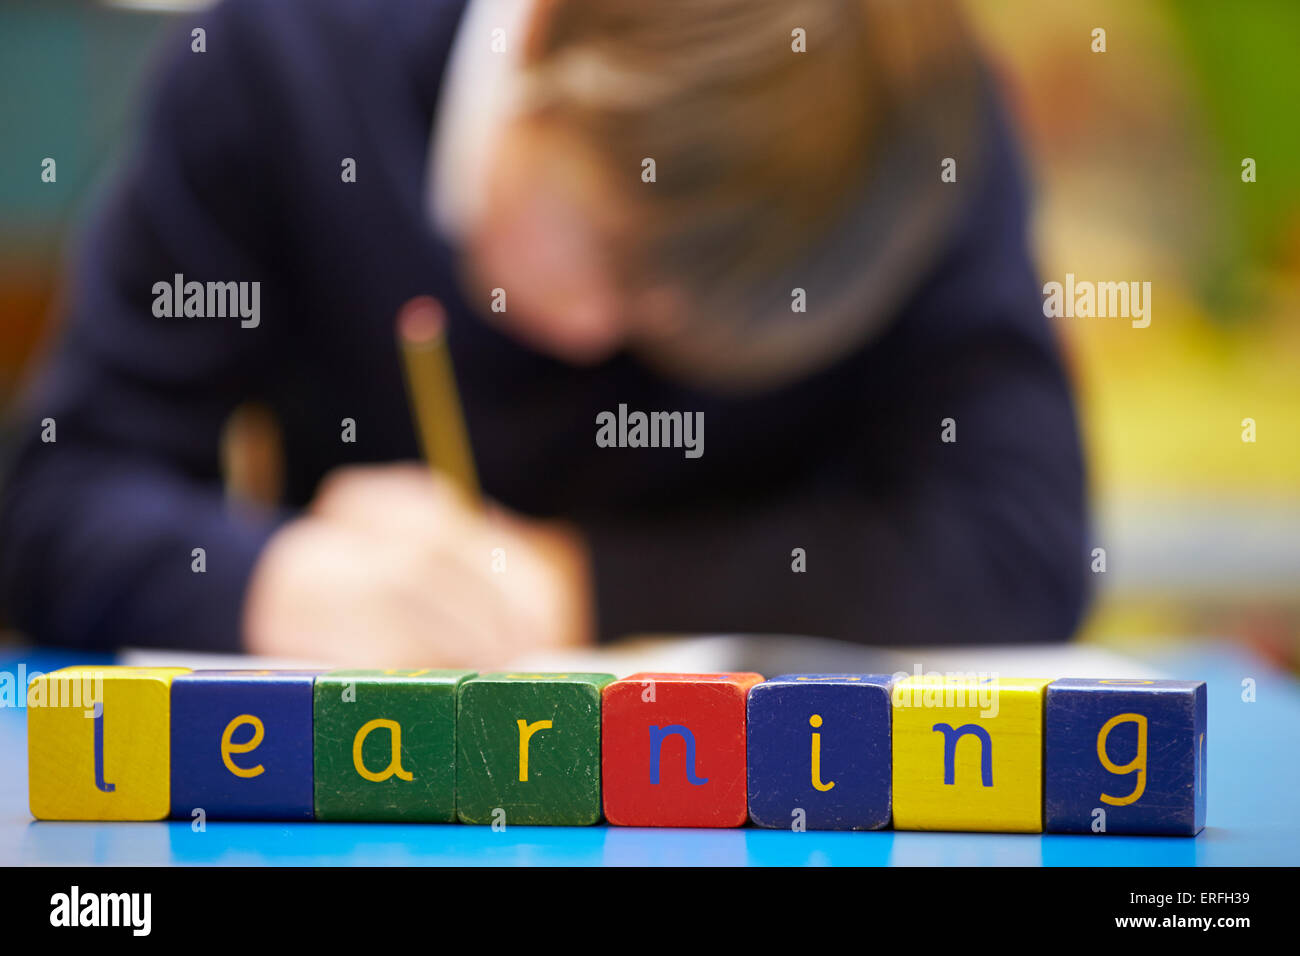 Word "Learning" Spelt In Wooden Blocks With Pupil Behind Stock Photo